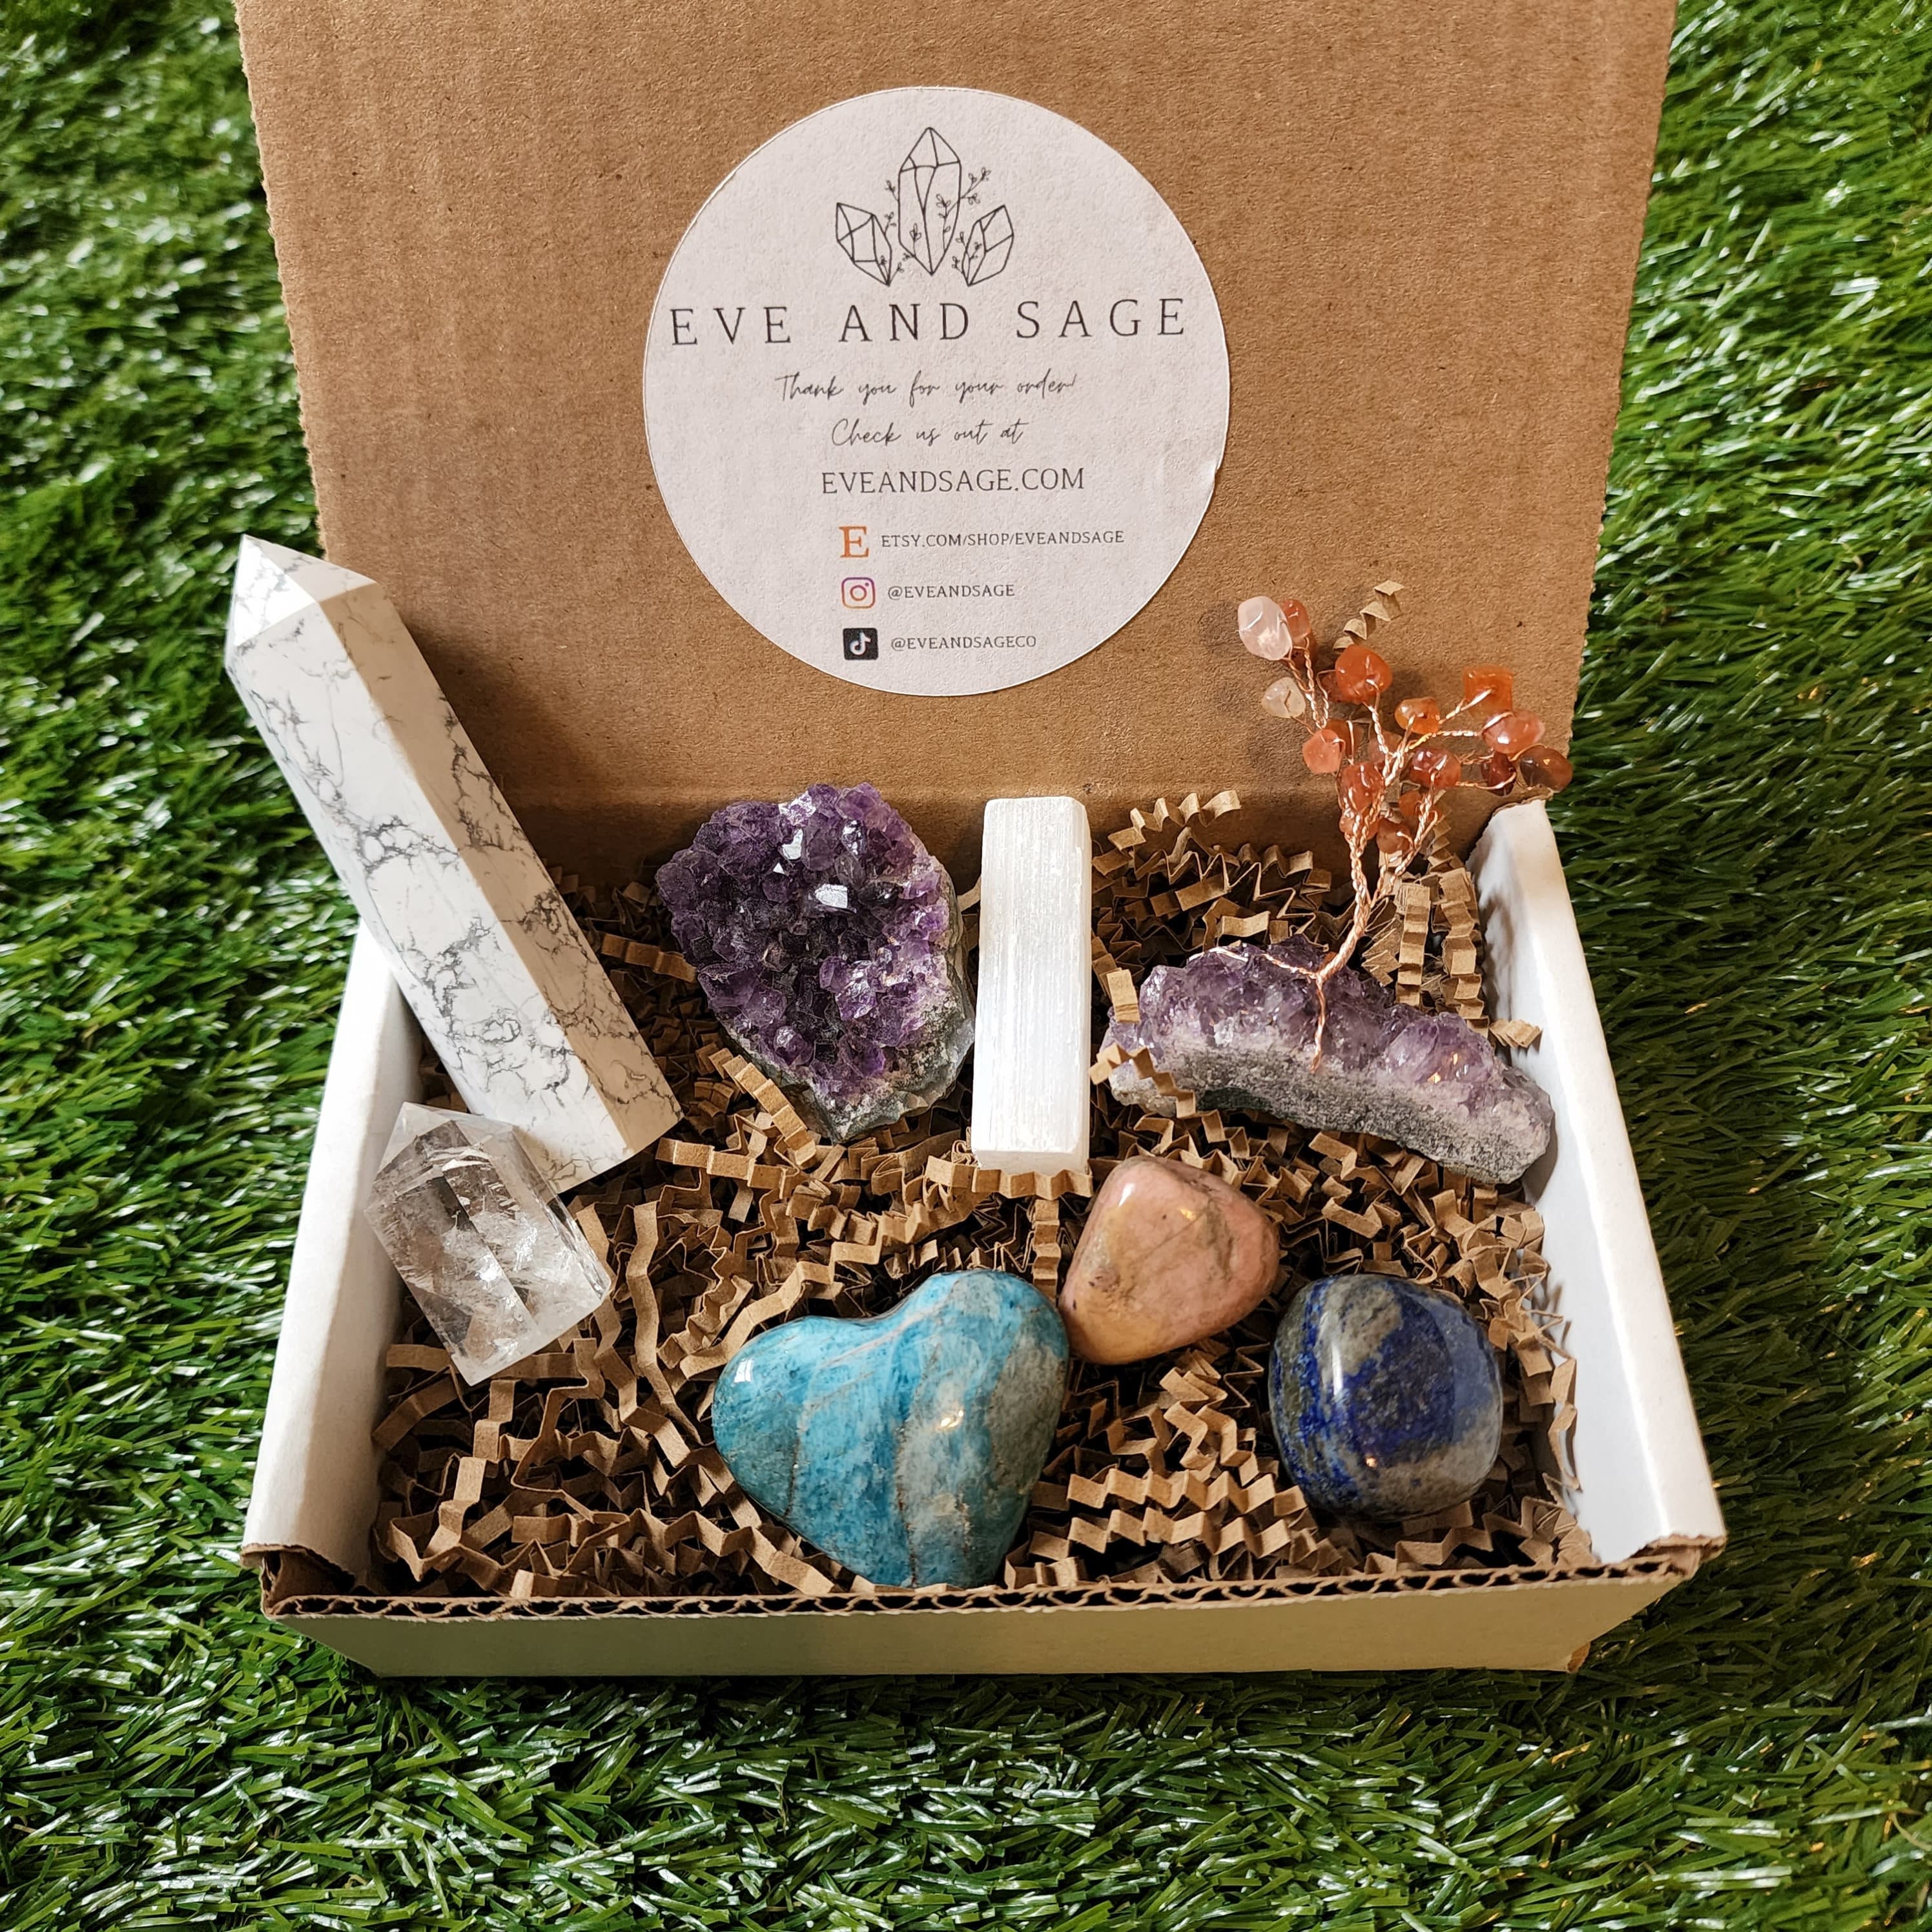 Crystal Mystery Box - Angelic Roots